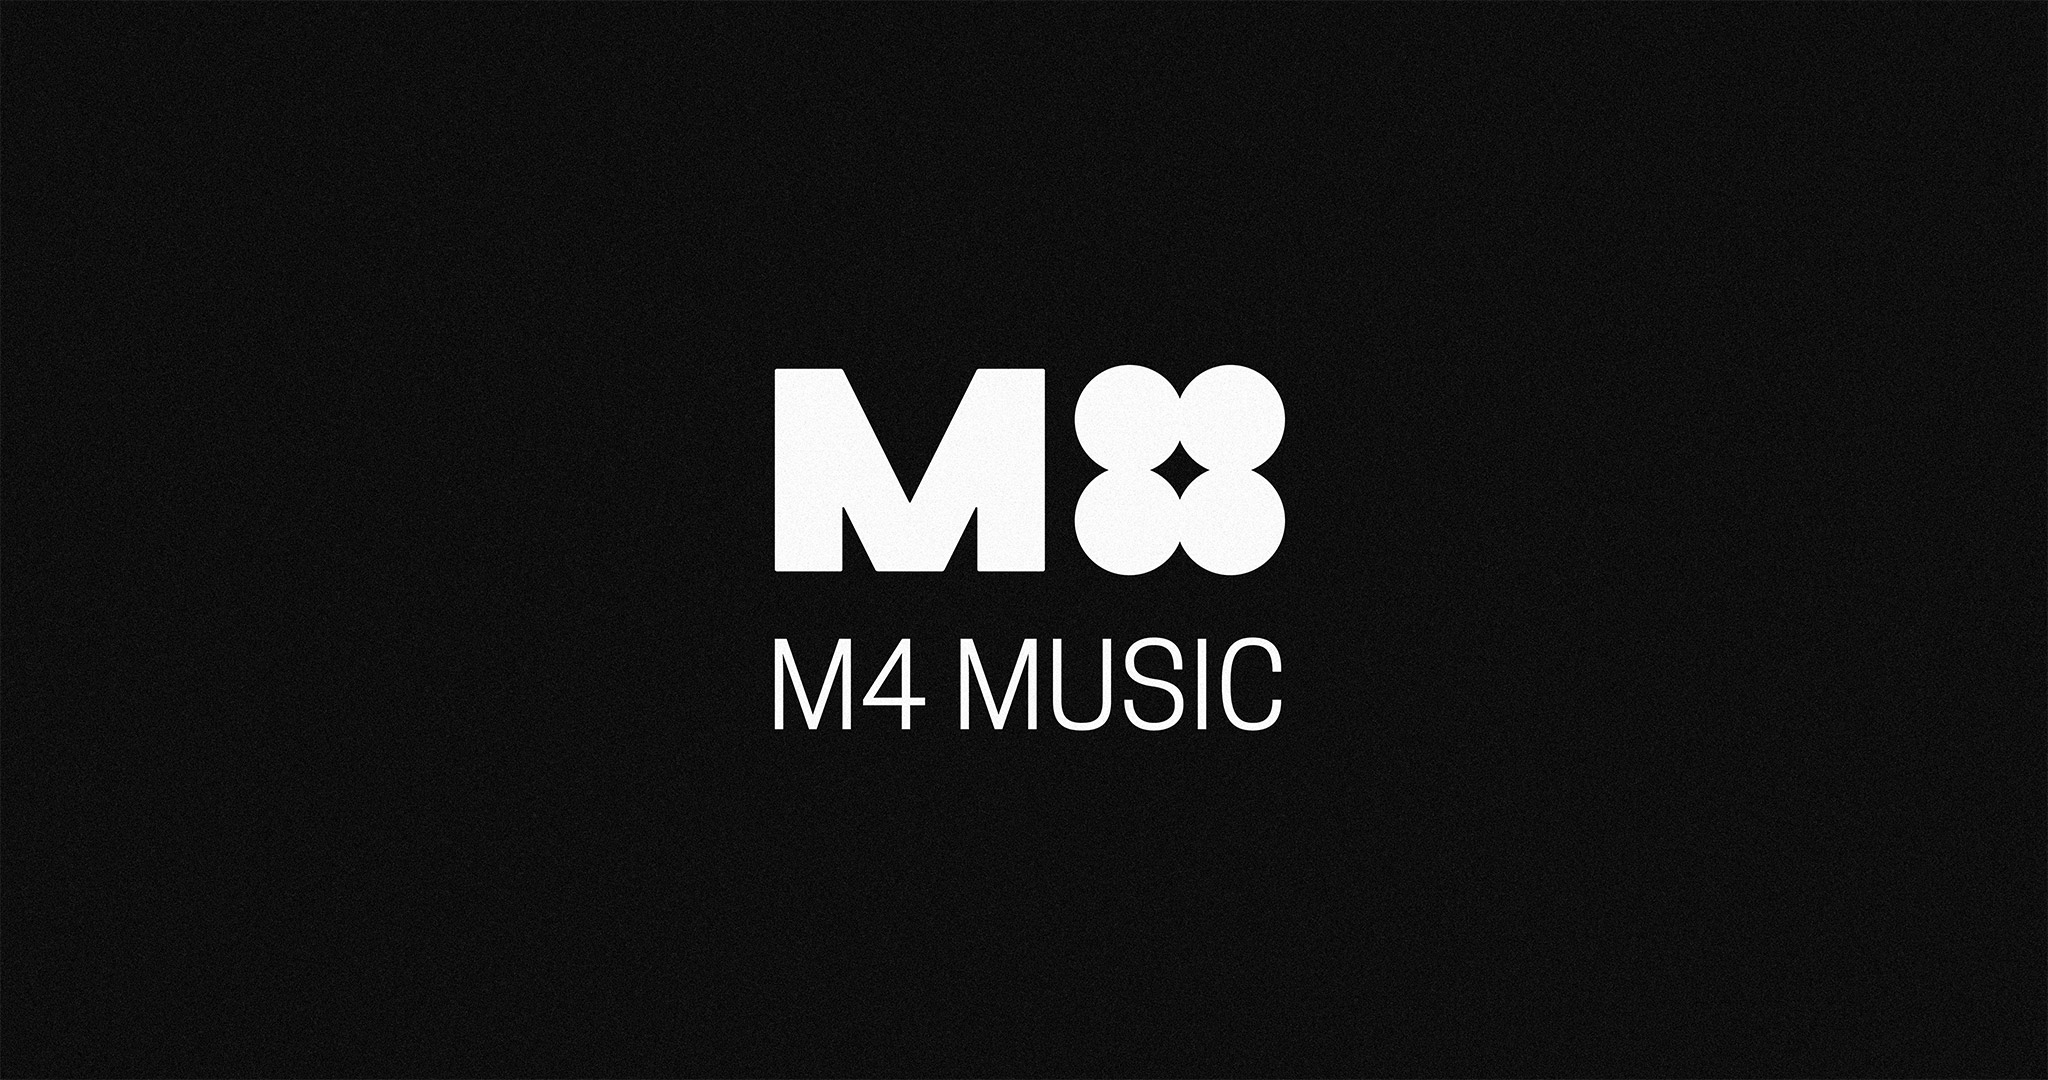 The M4 Music logotype. It features a bold, industrial, uppercase ‘M’, and 4 circles grouped together to represent the number ‘four’; accompanied by text reading ‘M4 MUSIC’ underneath in all-caps. White logotype over black background.